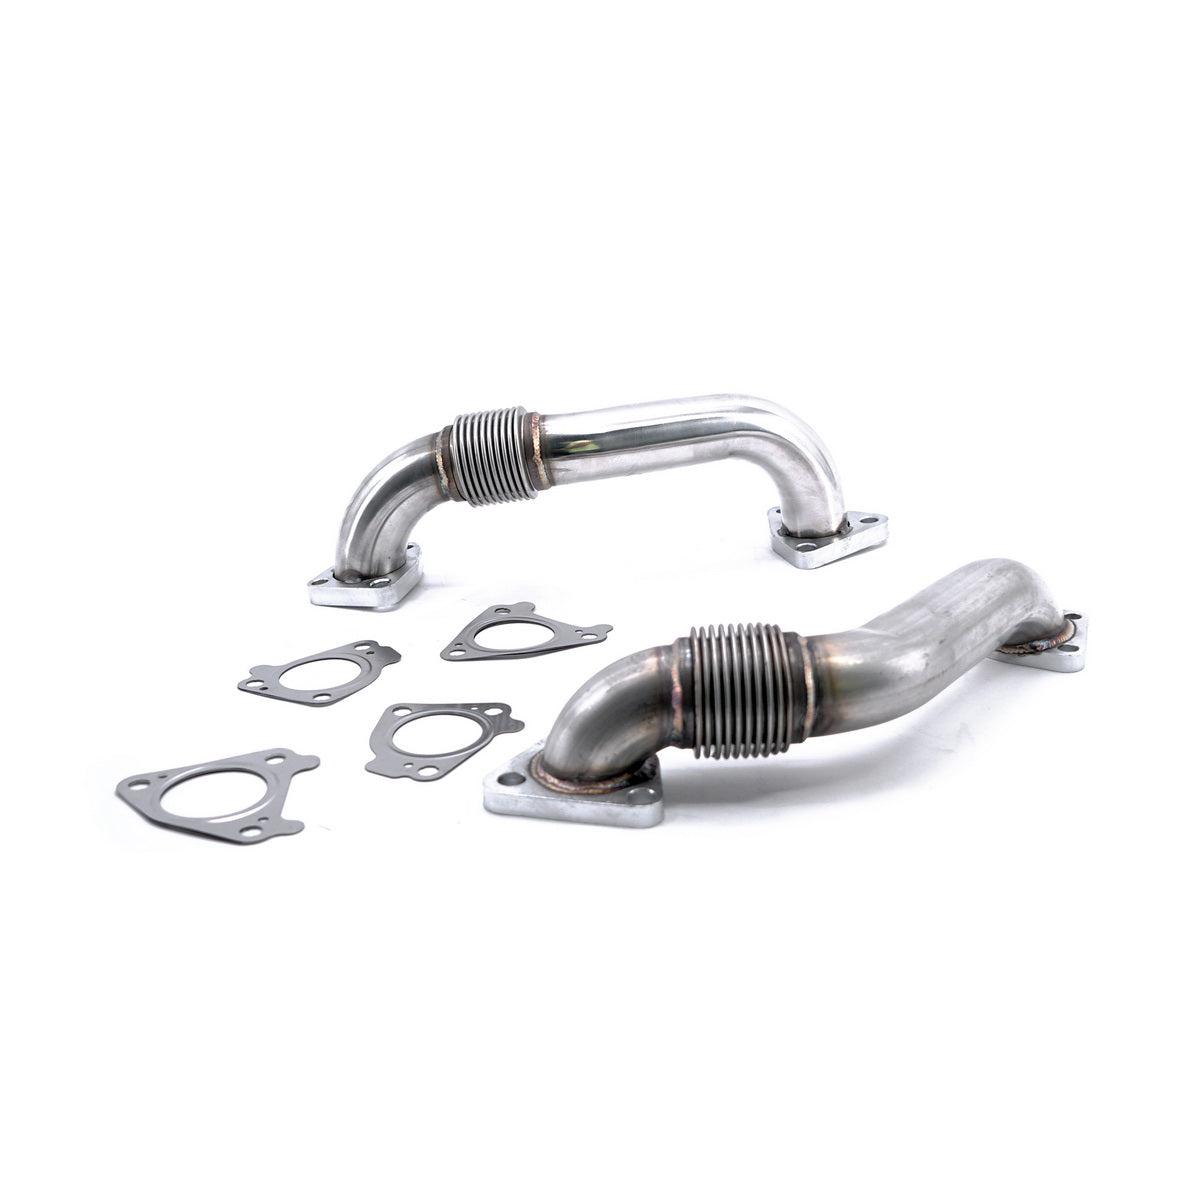 2001-2004 Duramax 2" Replacement Up-Pipes (031-HSP)-Up-Pipes-HSP Diesel-031-HSP-RAW-Dirty Diesel Customs